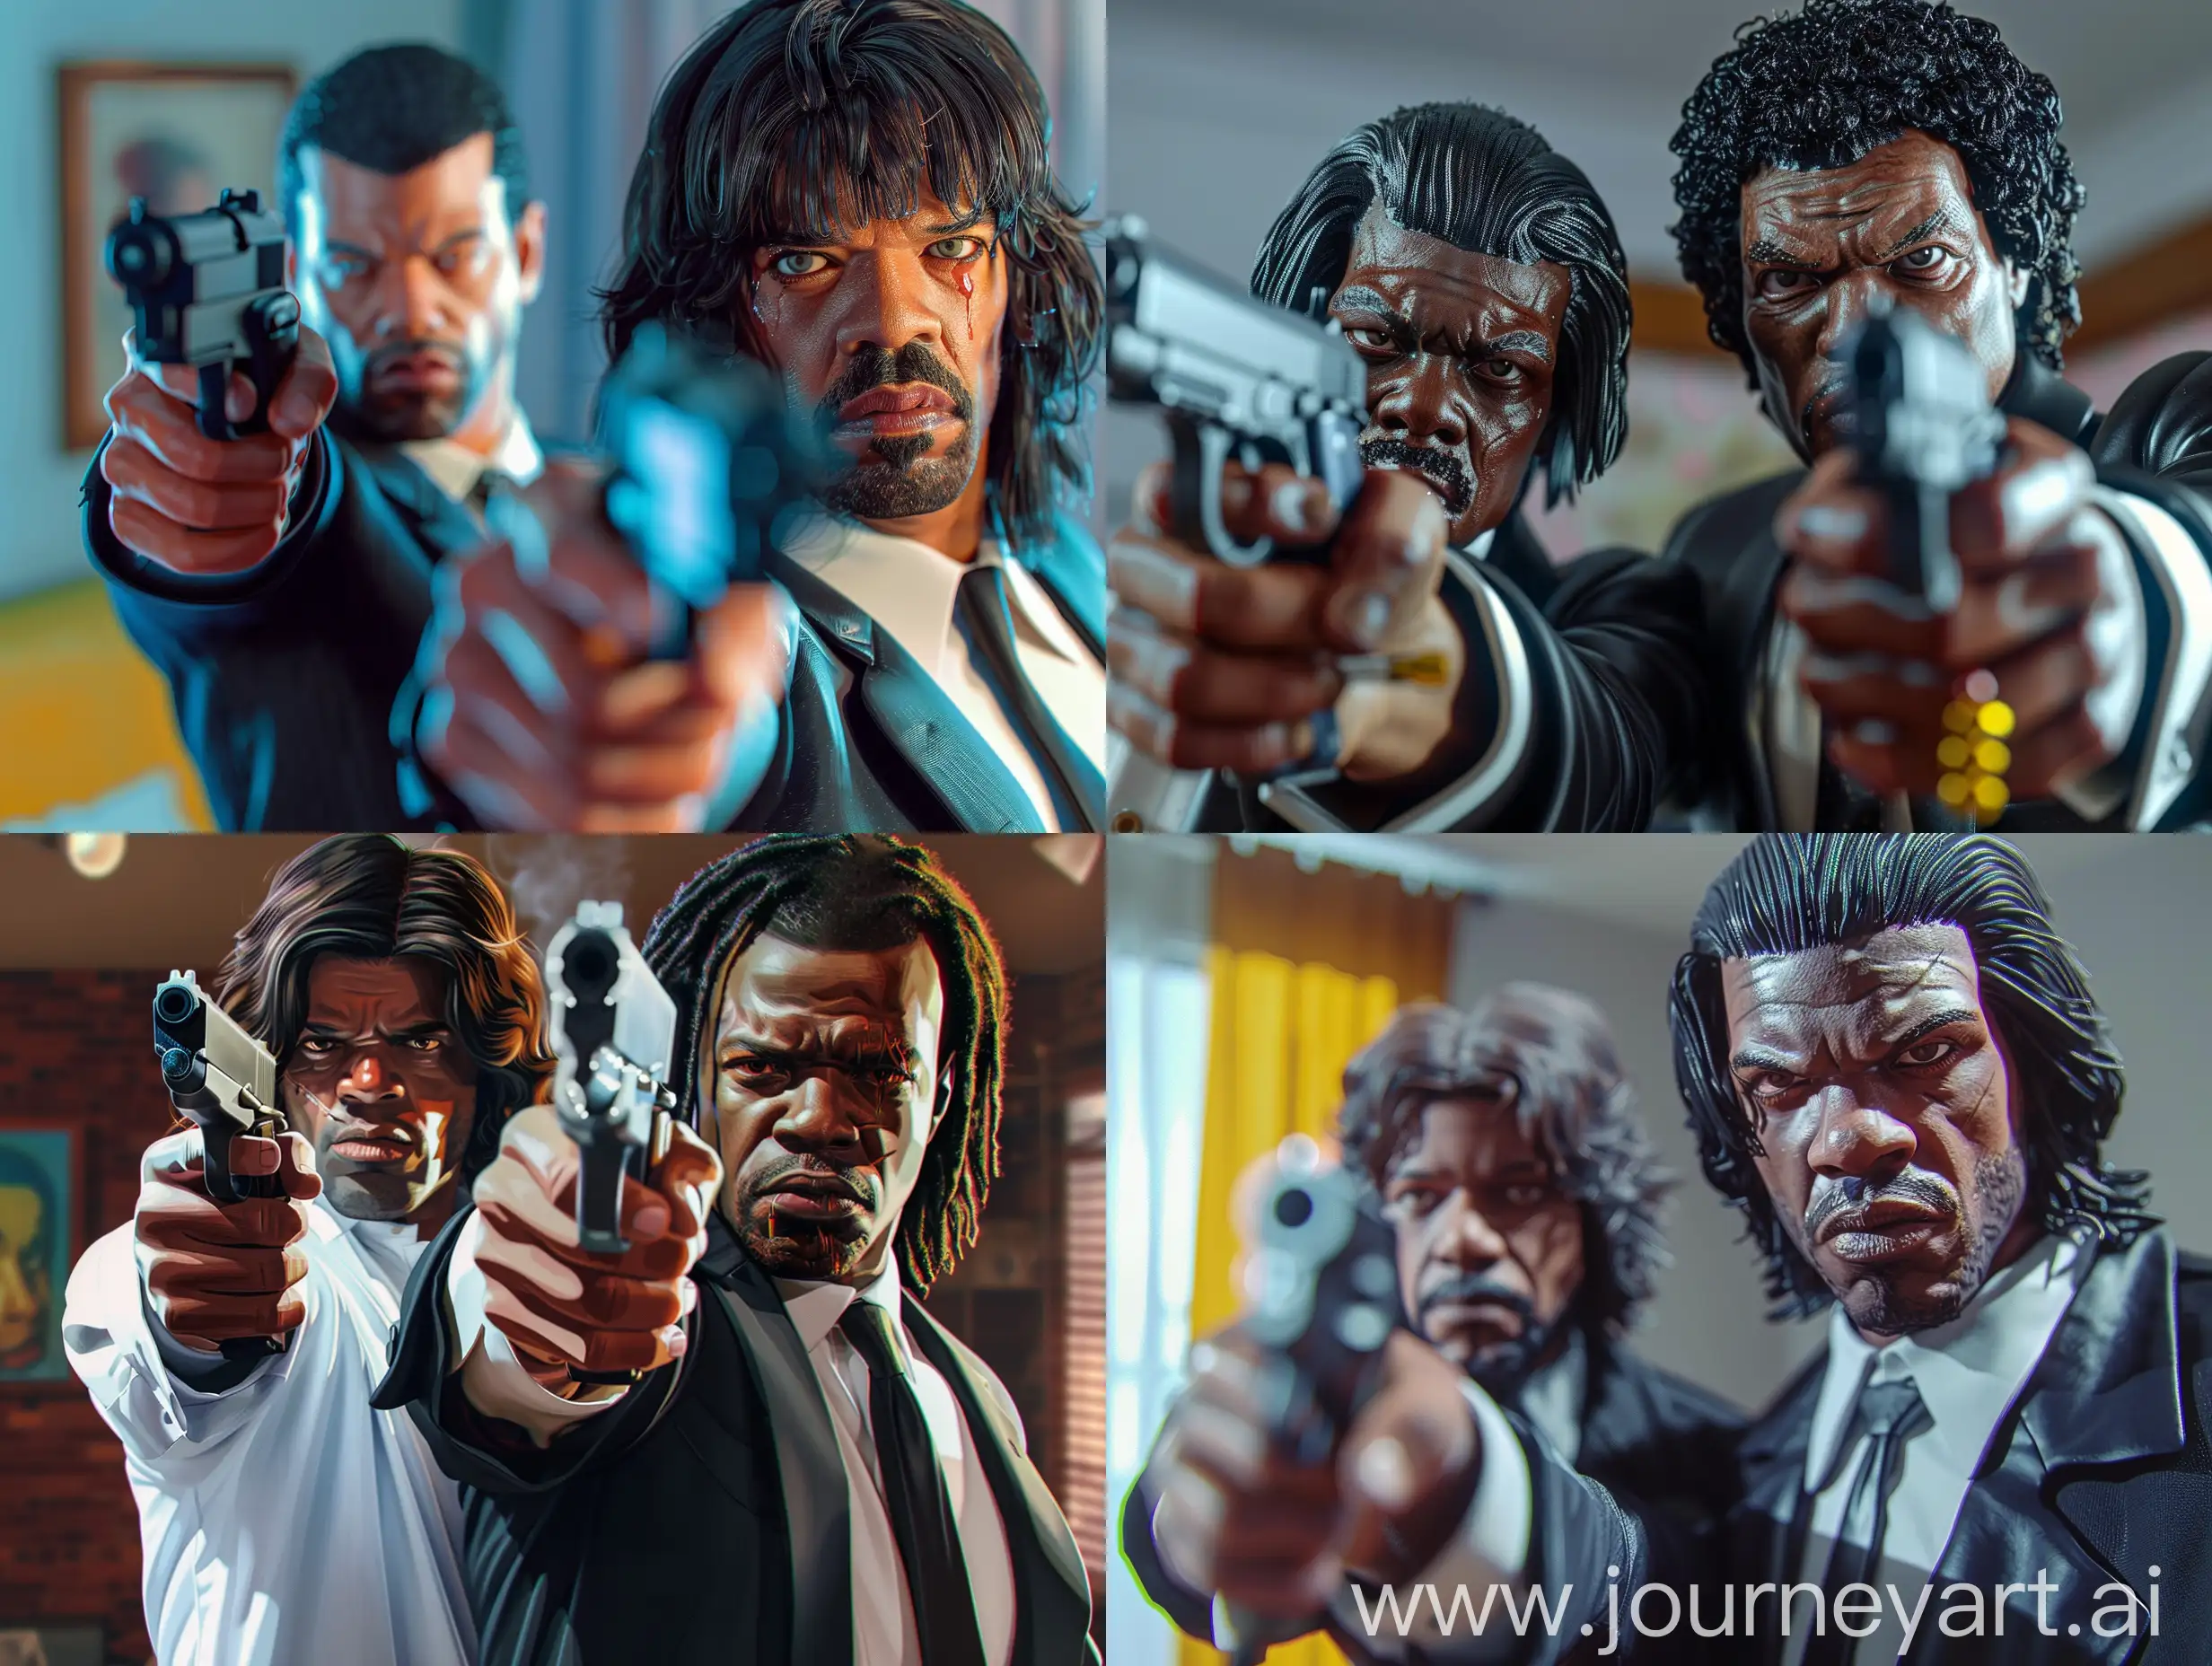 Photorealistic model  version of Pulp Fiction movie as Vincent Vega and Samuel Jackson pointing guns  on them apartment serious faces colorful portraits close up chiaroscuro beautiful lighting cinematic key visual and aesthetic features of [pulp fiction ] 